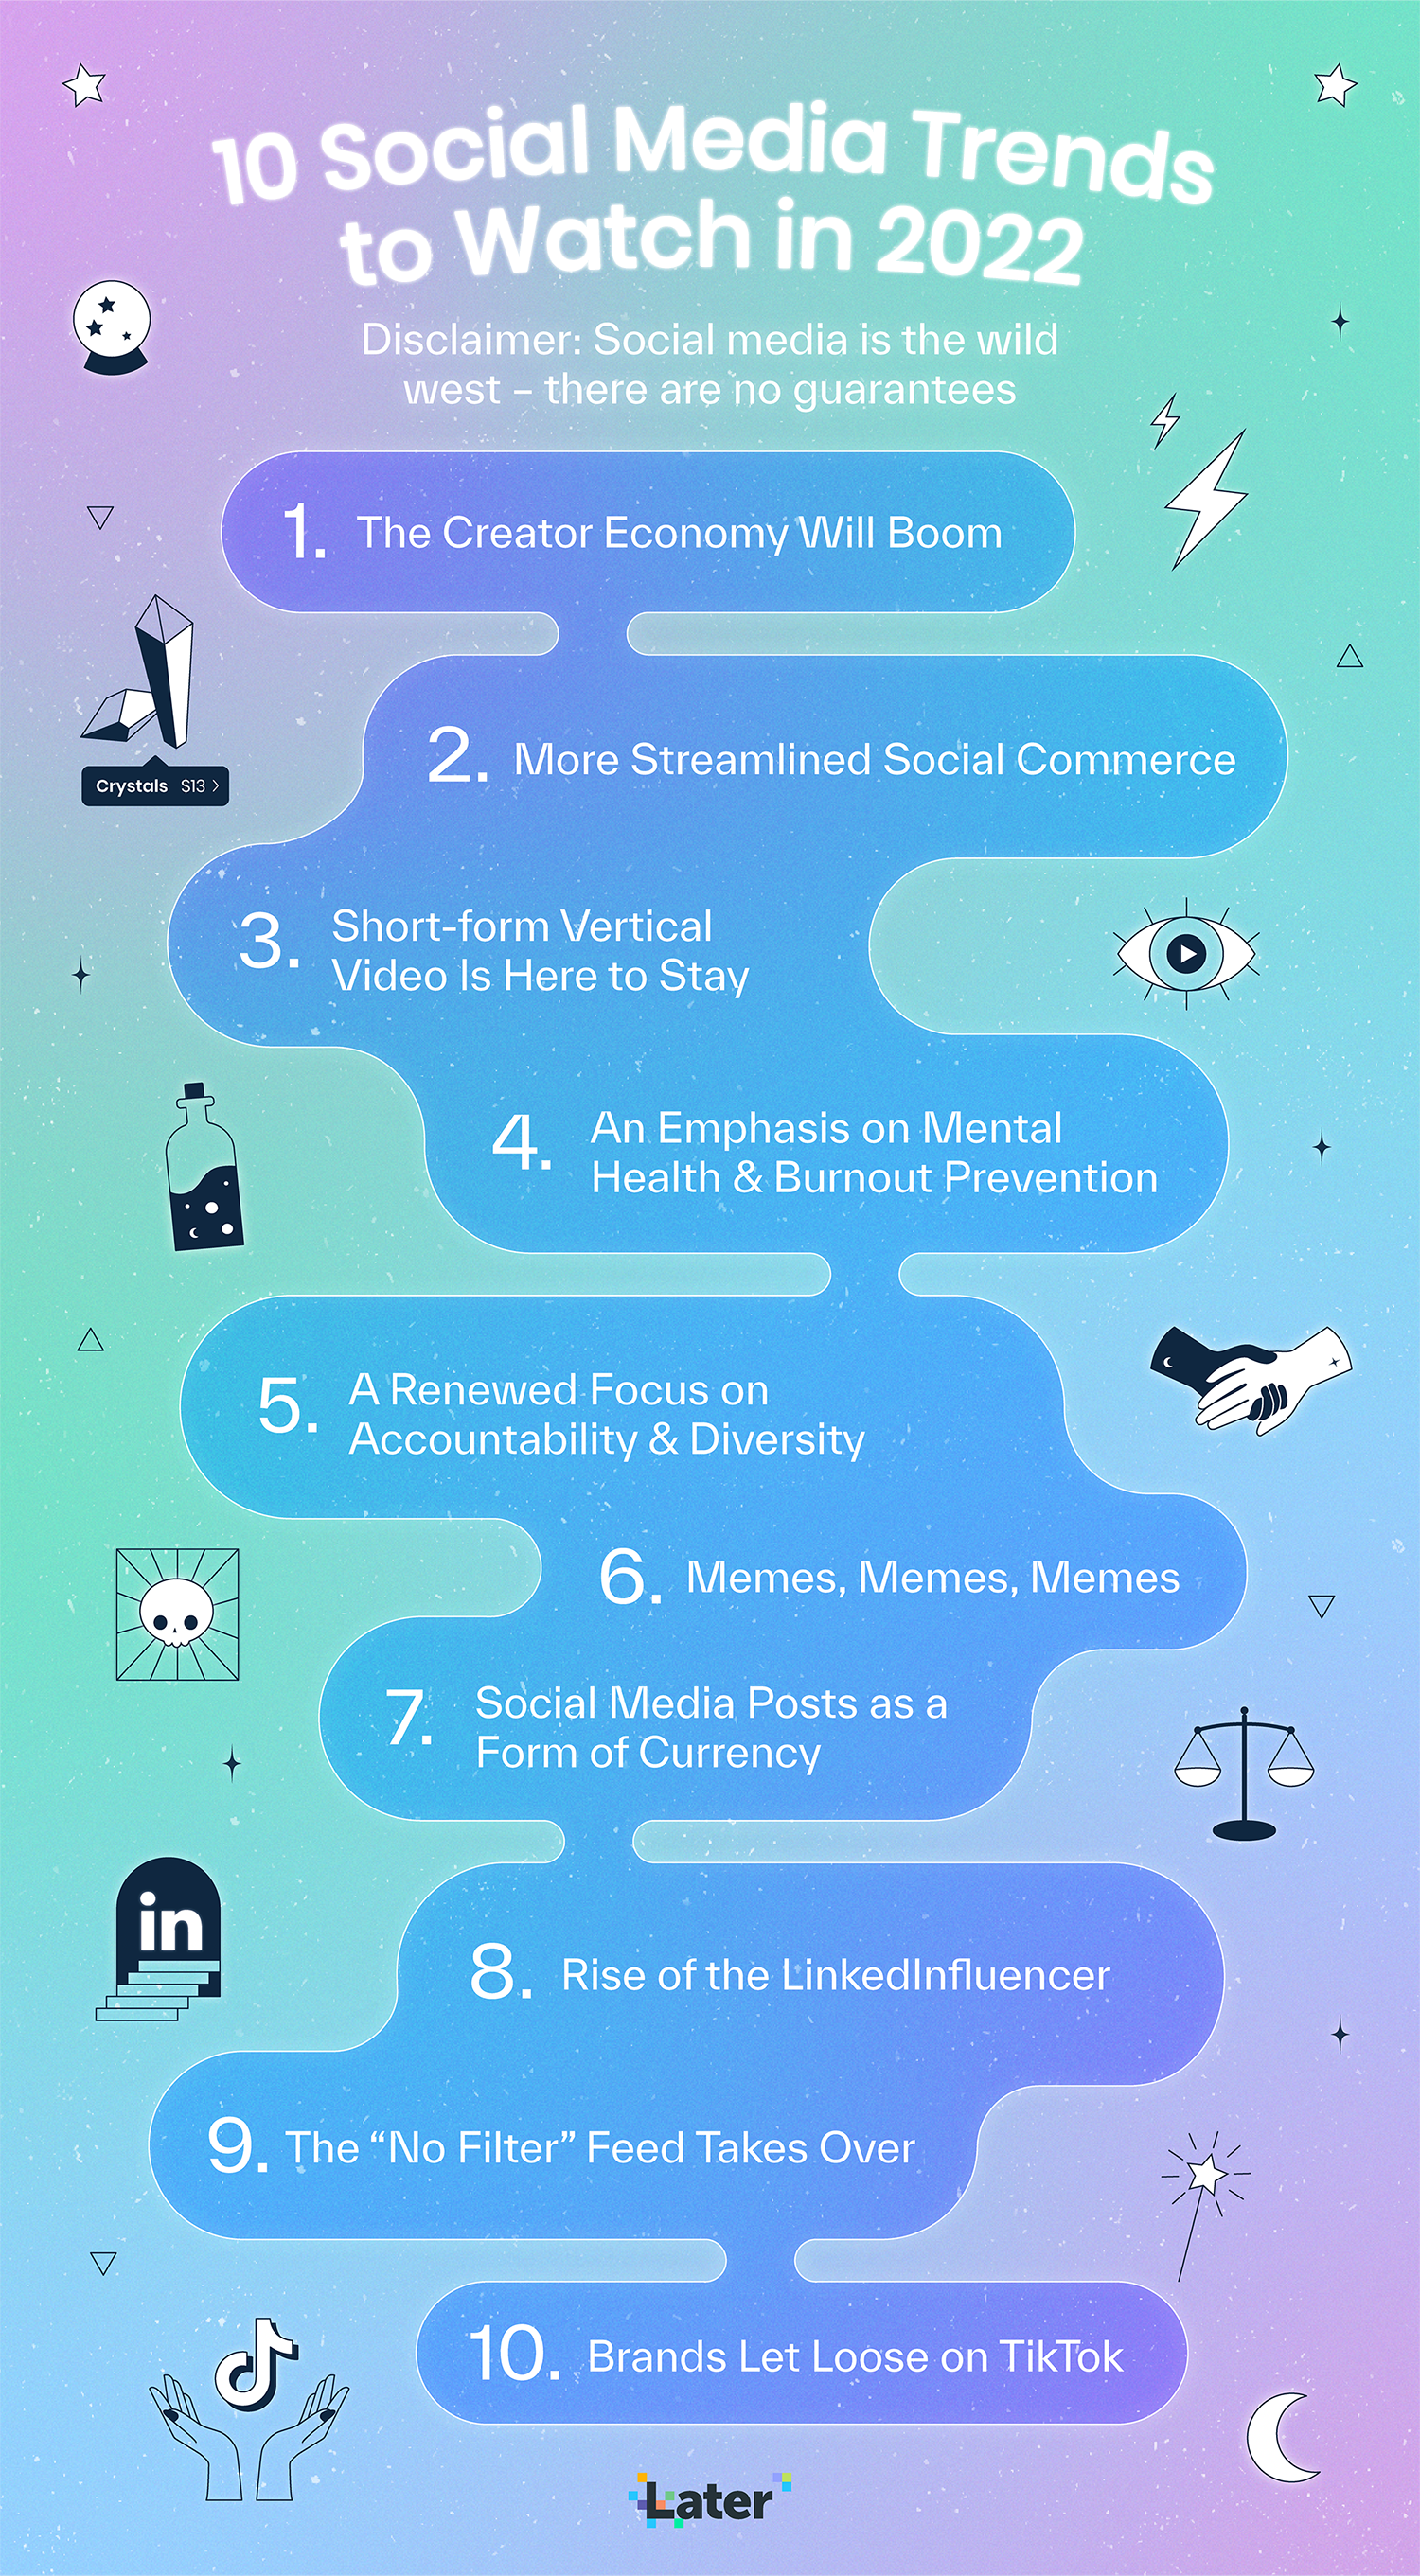 10 Social Media Trends to Watch in 2022